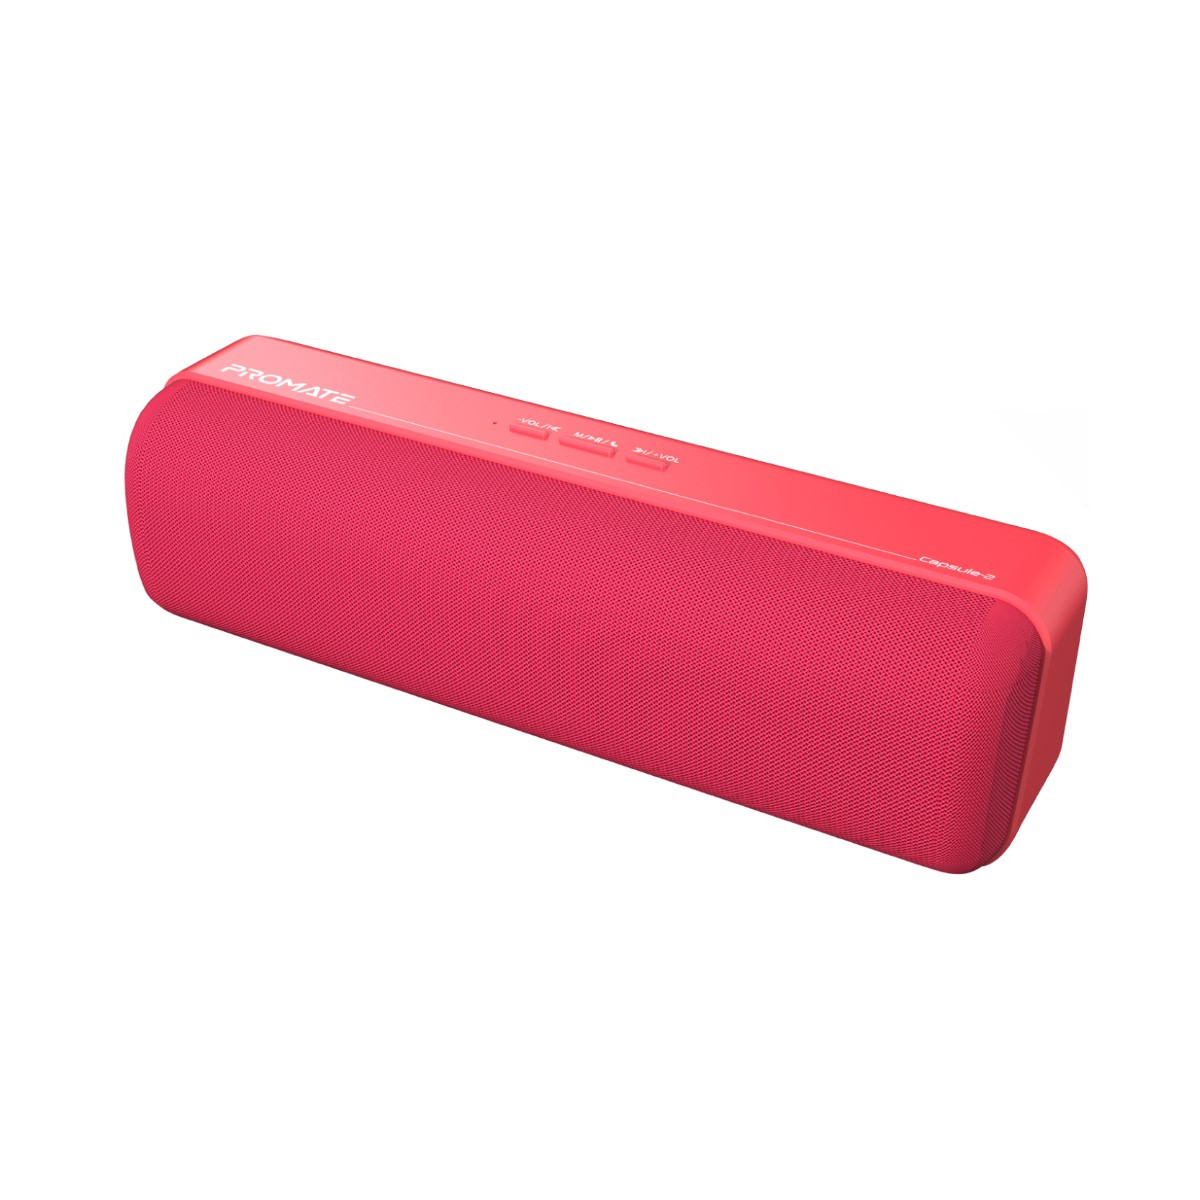 Promate Bluetooth Speaker, Portable HD 6W True Wireless Speaker with Bluetooth 5.0, Long Playtime, USB Media Port, Micro SD Card Slot and 3.5mm Port for iPhone 13, iPad Air, iPod, Capsule-2.RED